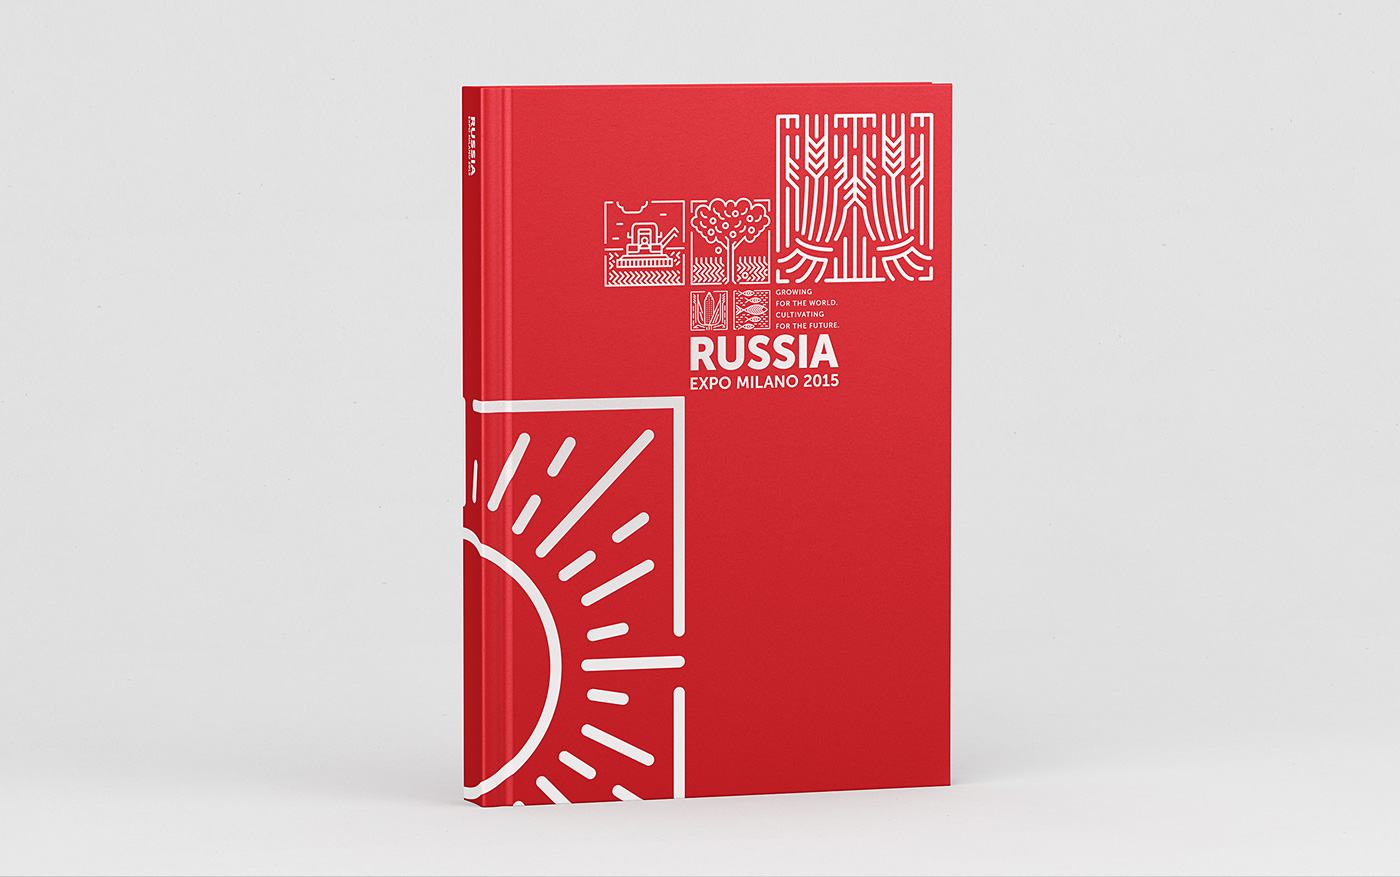 expo Russia red book Website milano expo 2015